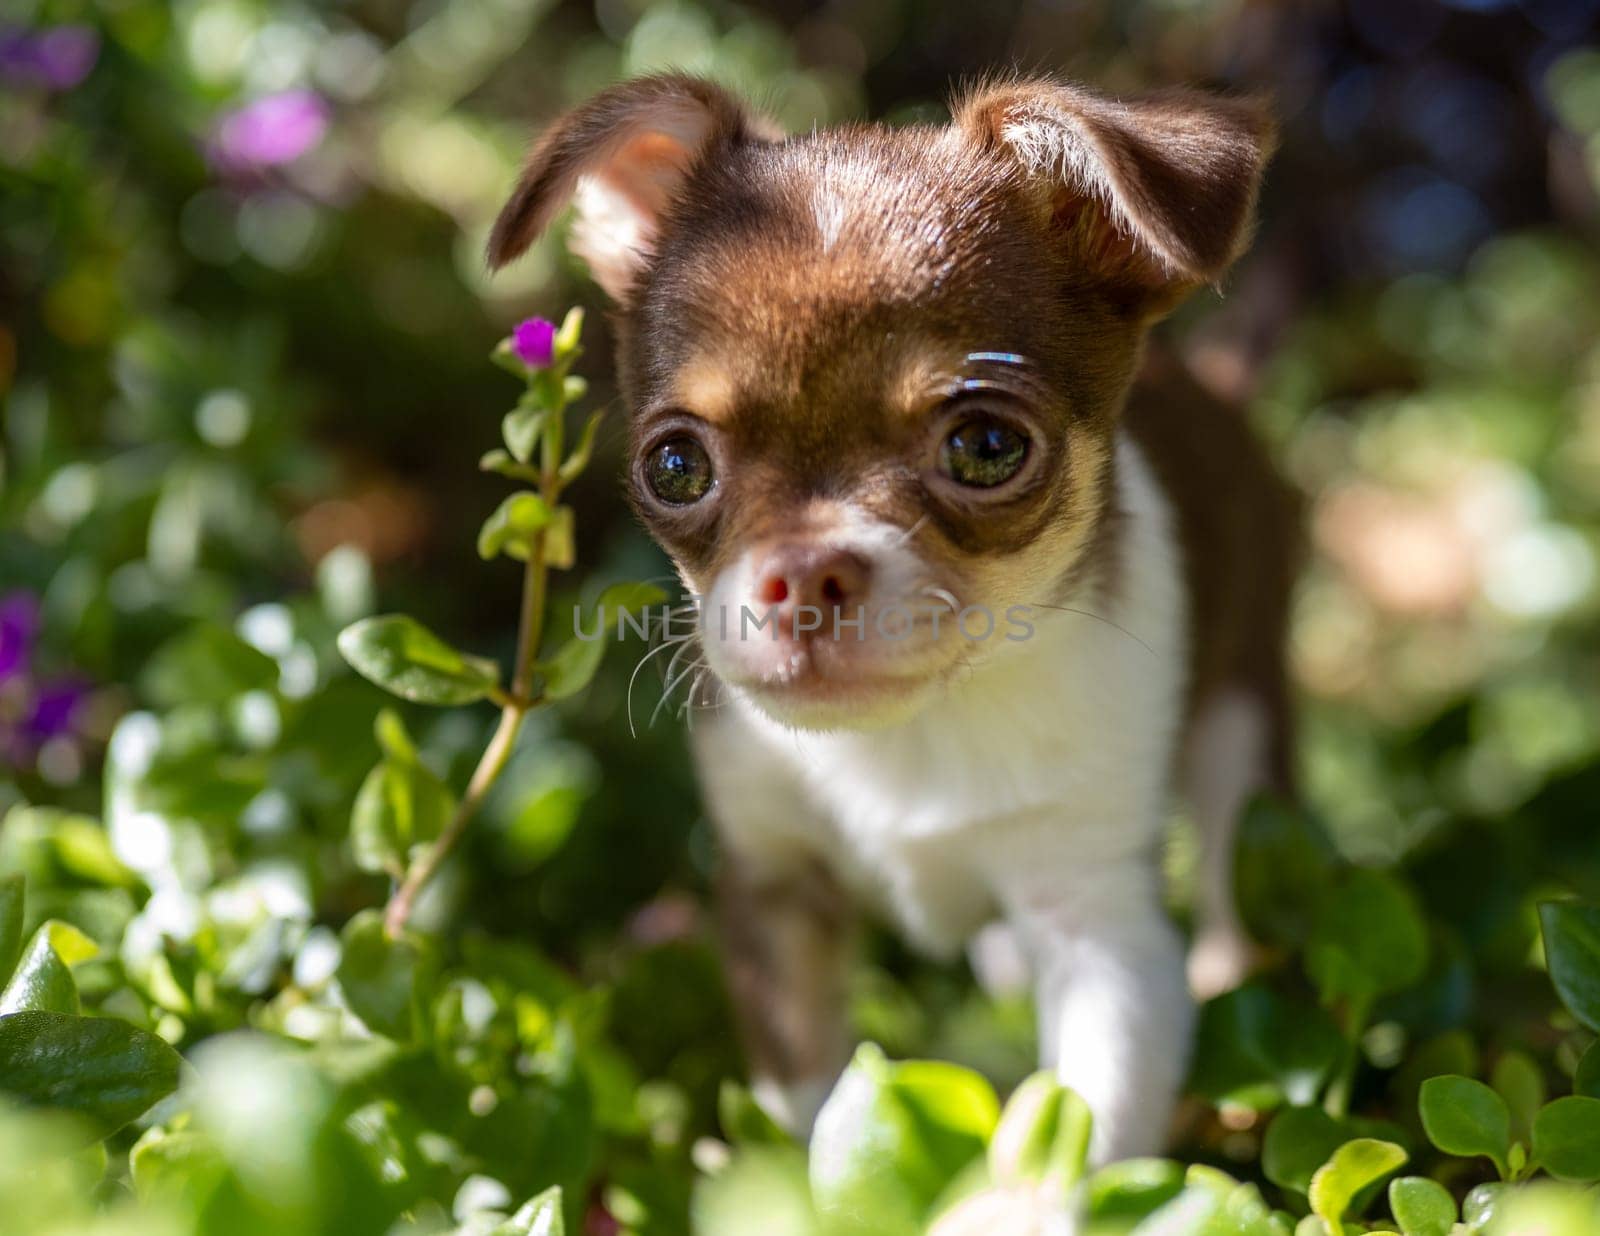 With bright eyes and a sense of wonder, a Chihuahua puppy explores a lush garden, peering through a curtain of green leaves.